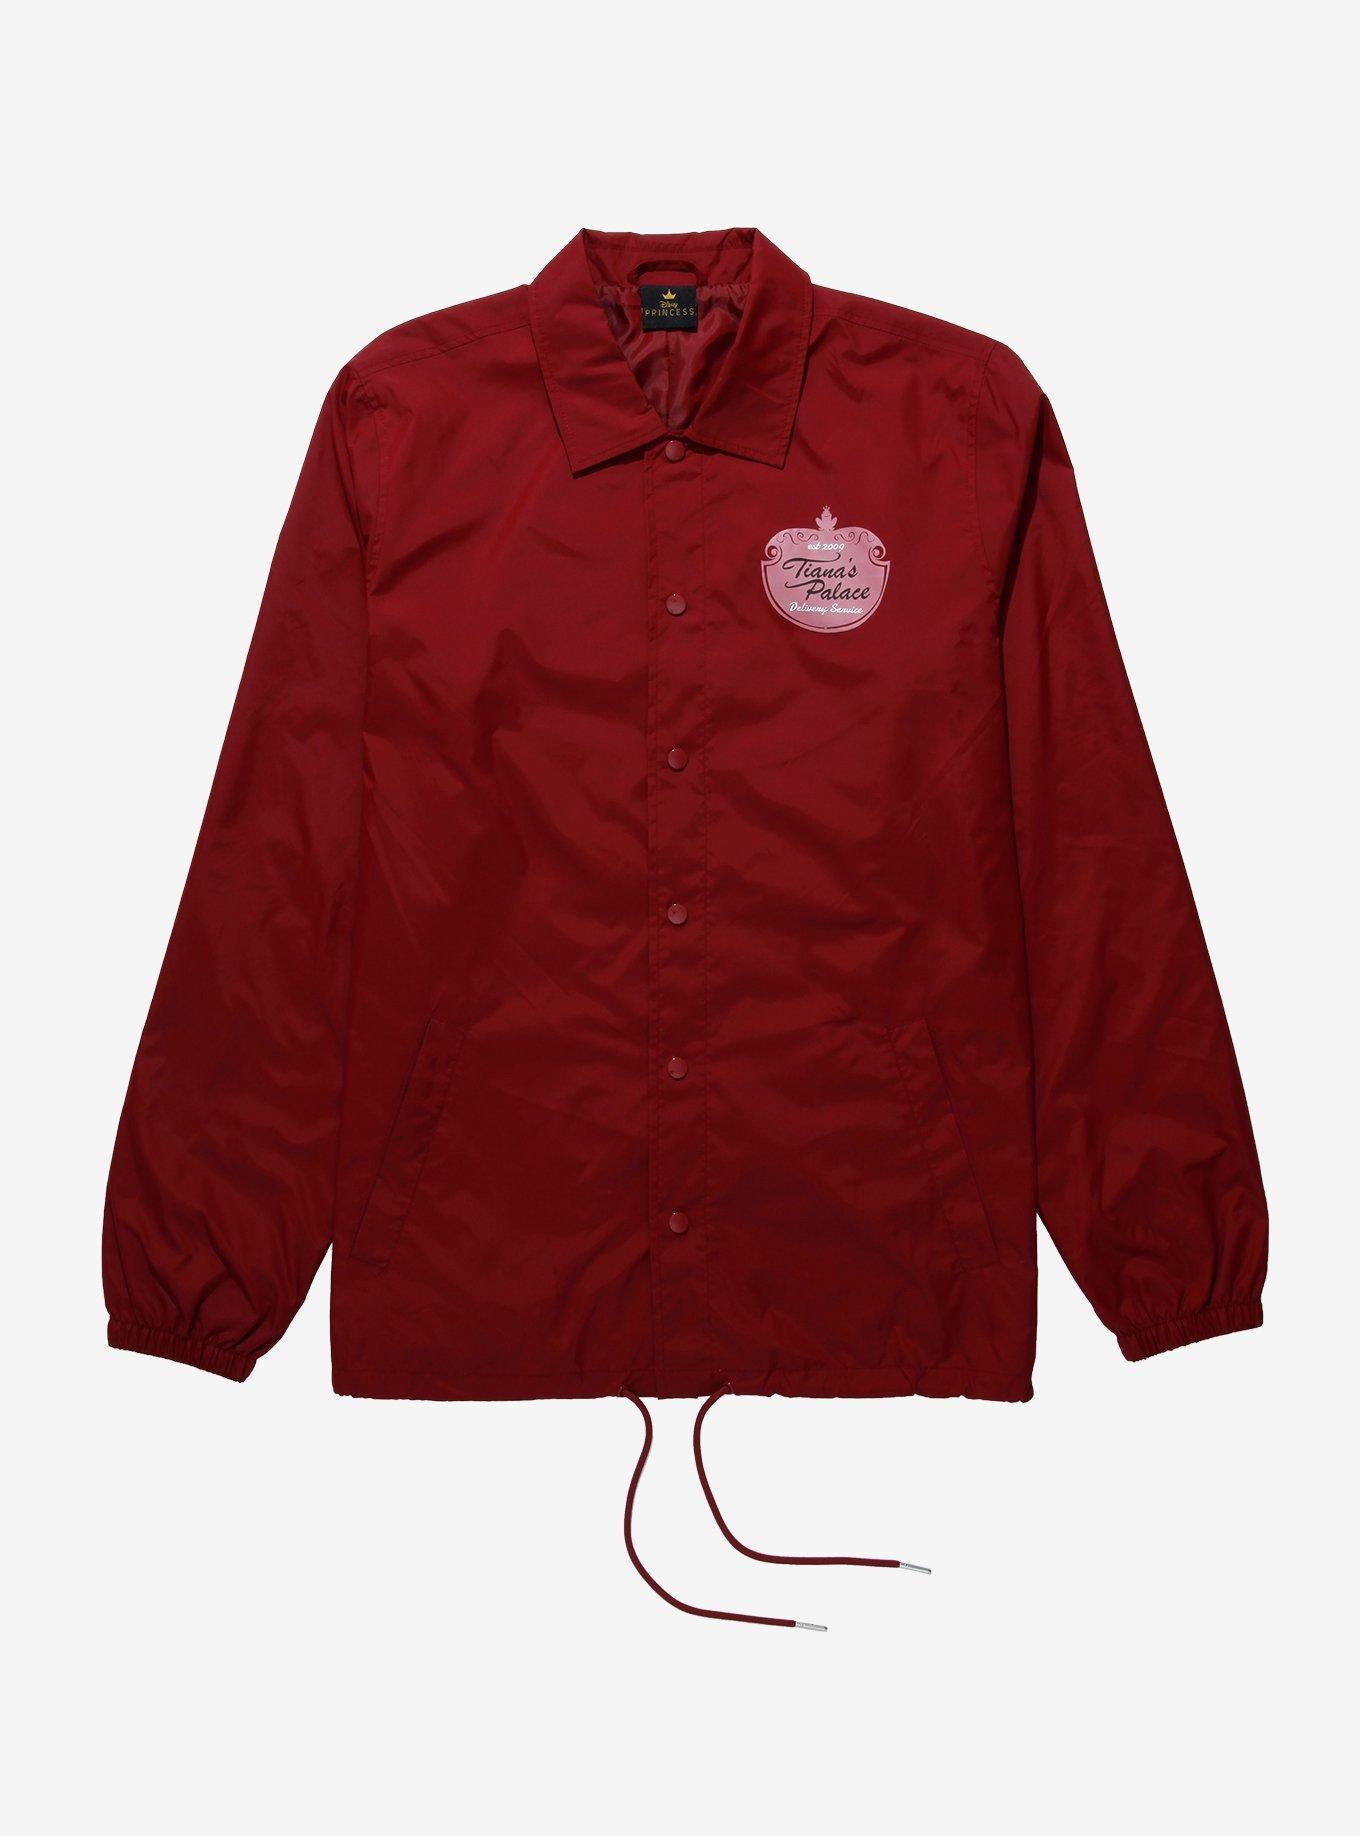 Disney The Princess and the Frog Tiana's Palace Coach's Jacket - BoxLunch Exclusive, BURGUNDY, hi-res